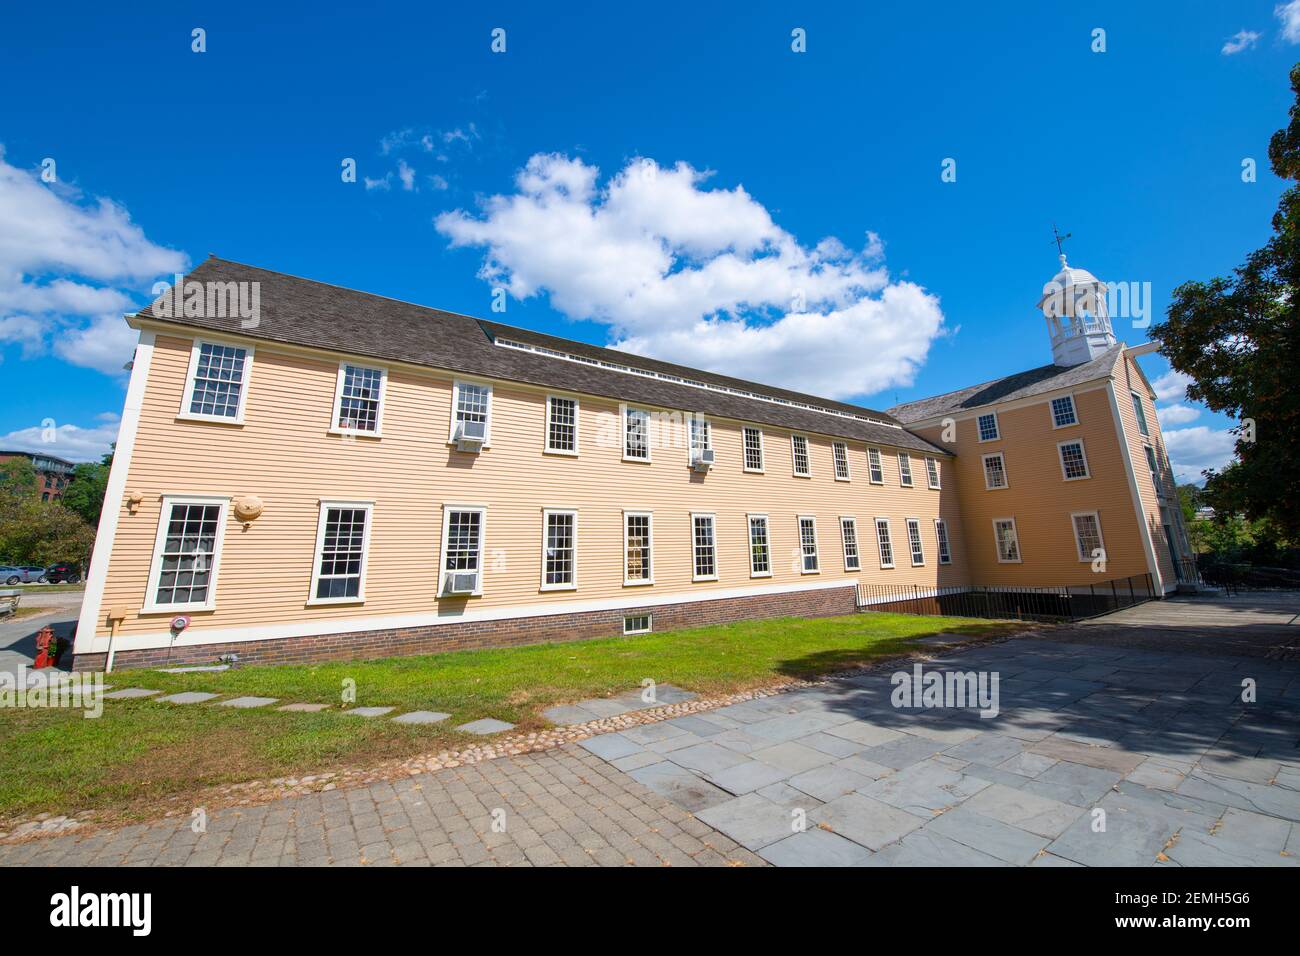 Historic Old Slater Mill building in Old Slater Mill National Historic Landmark on Roosevelt Avenue in downtown Pawtucket, Rhode Island RI, USA. Stock Photo